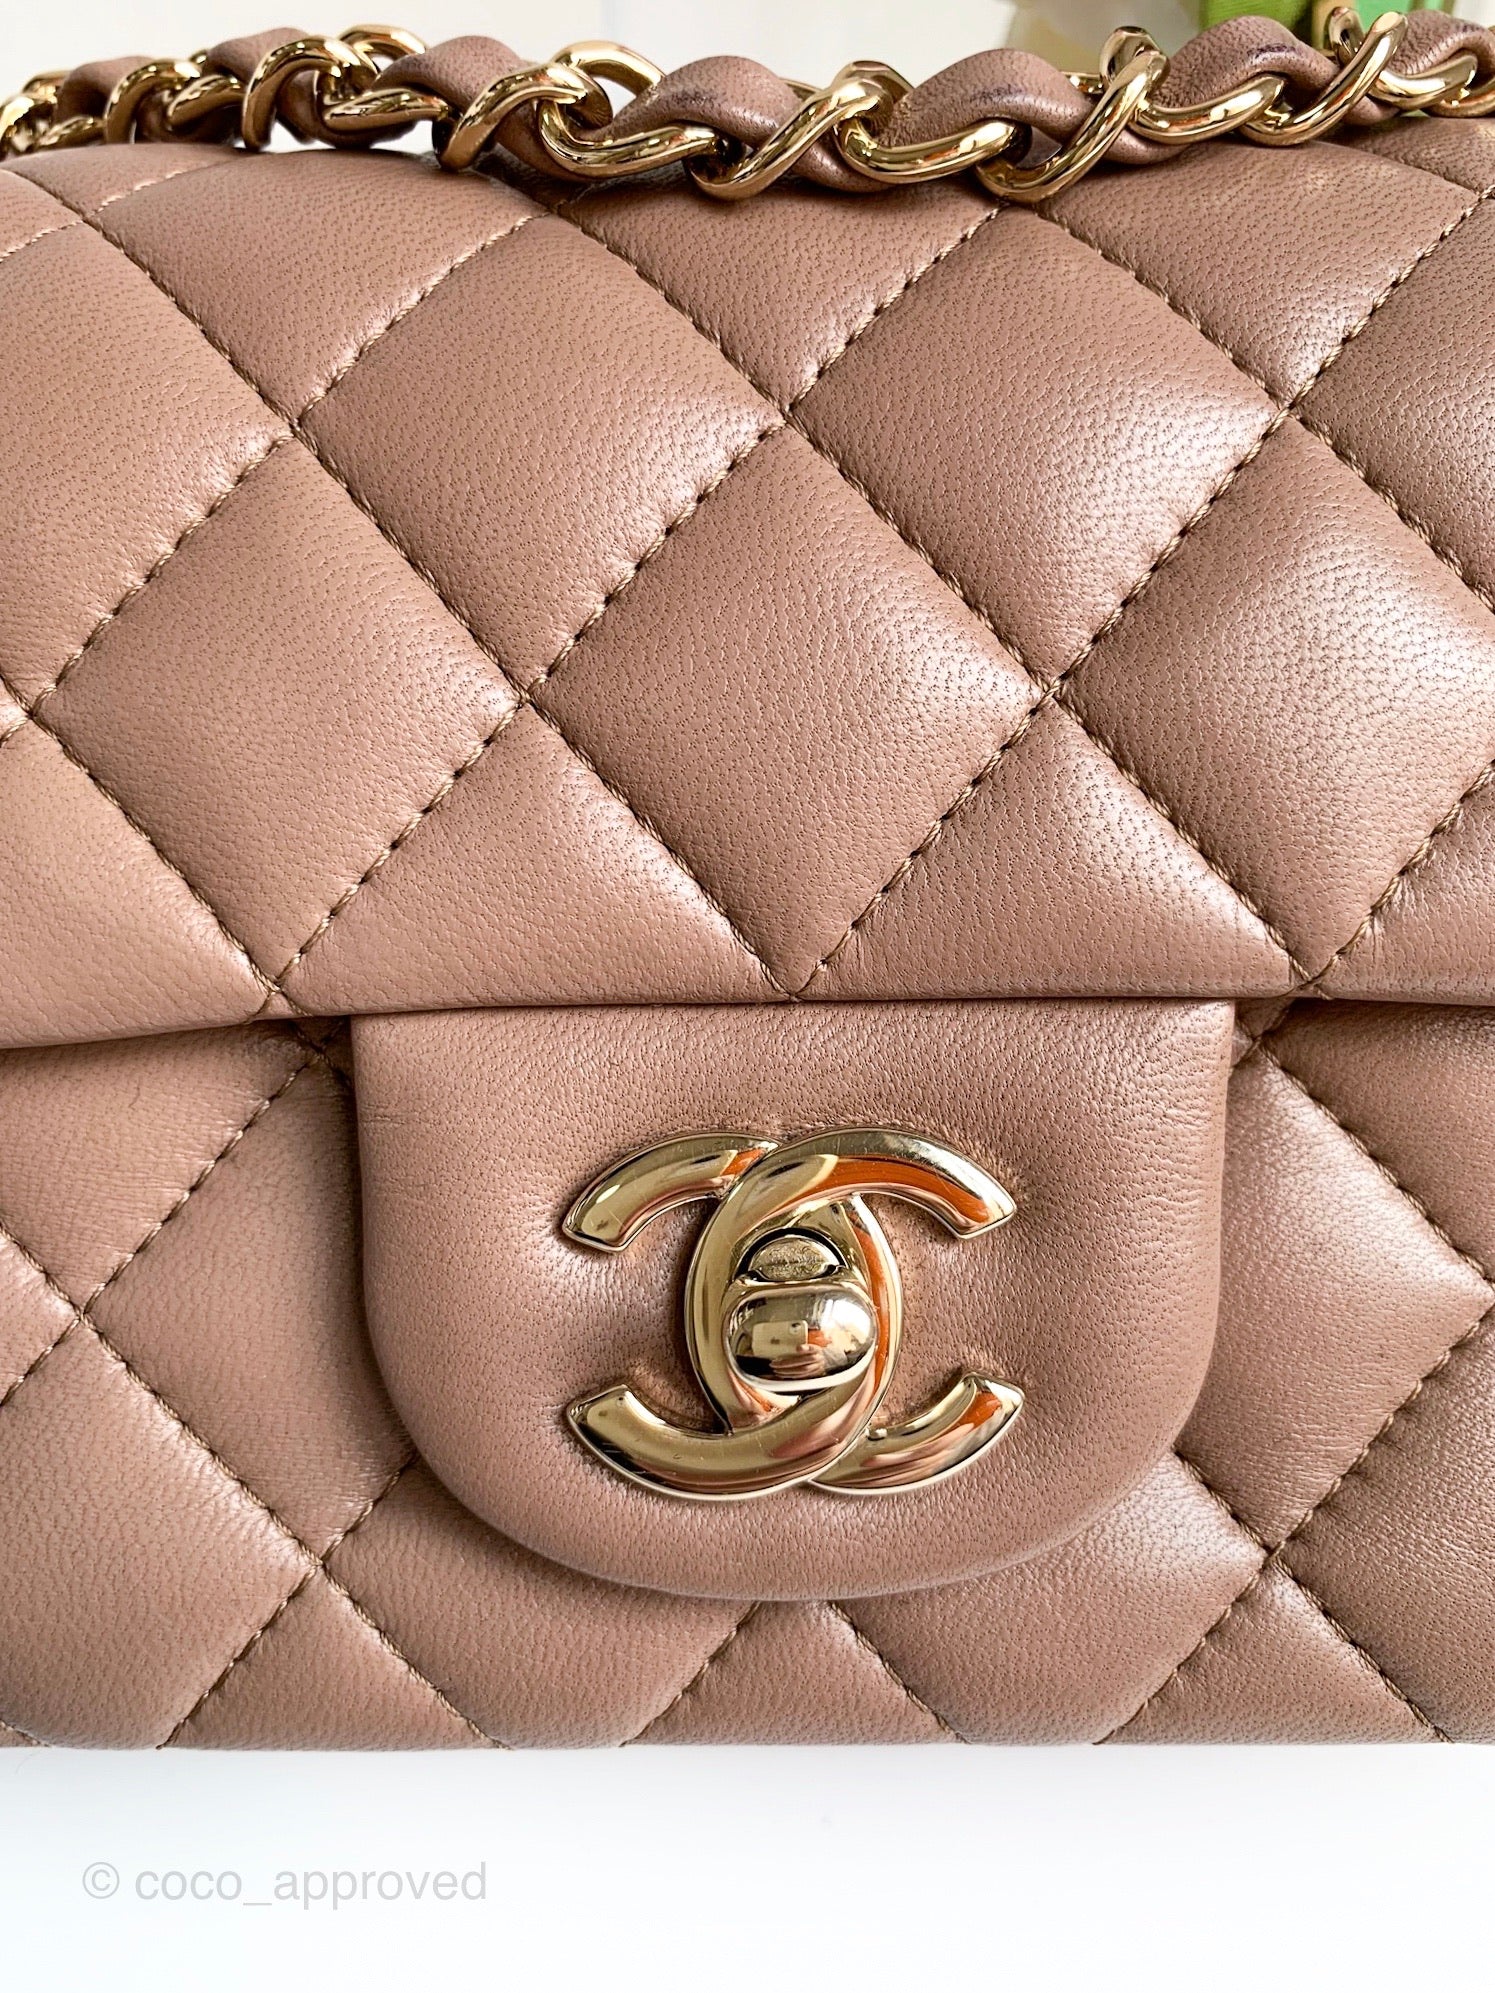 Chanel Square Classic Single Flap Bag Quilted Lambskin Mini Neutral 1706521